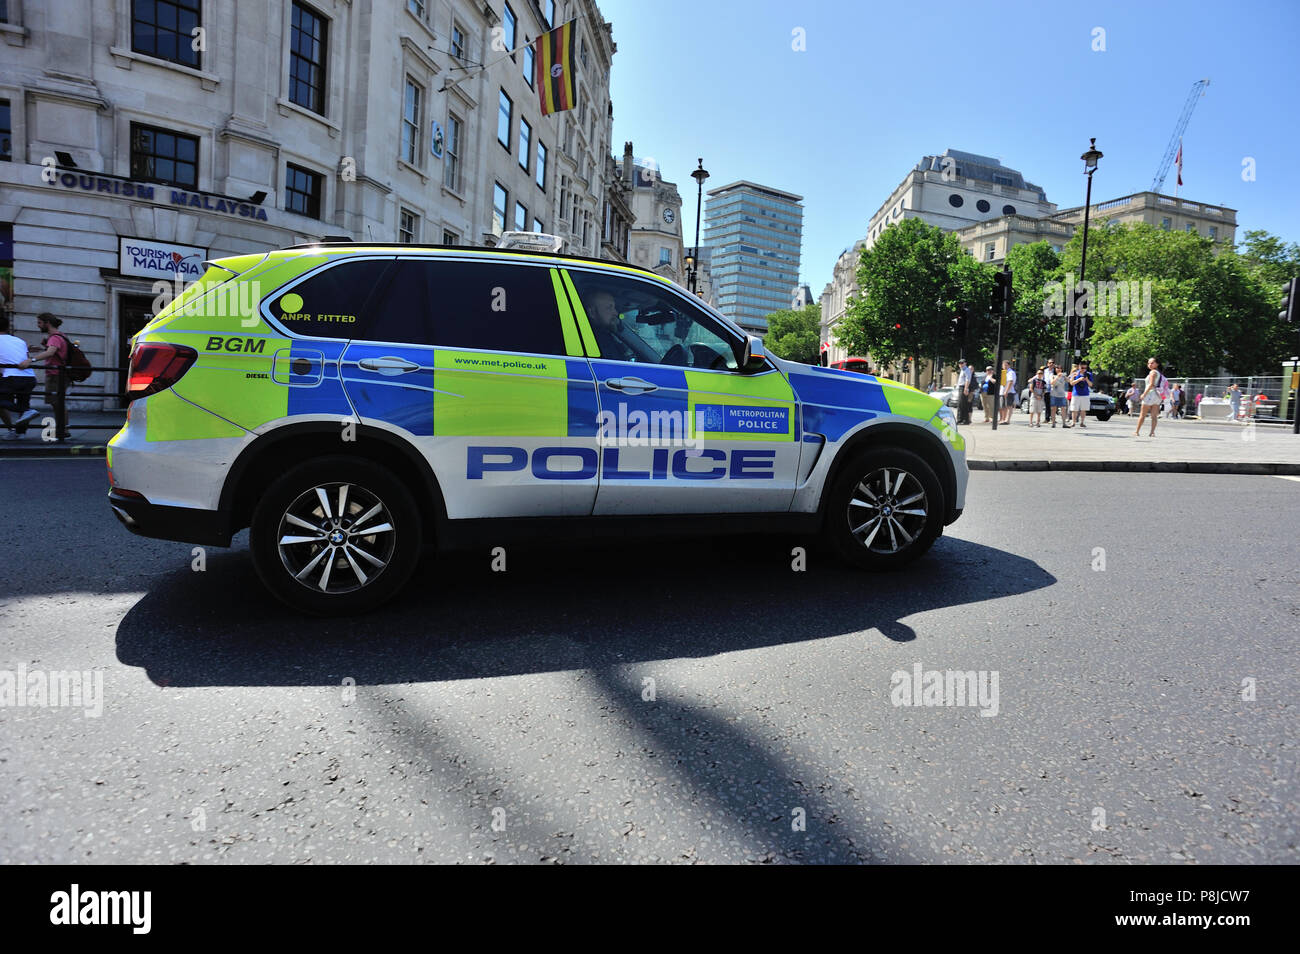 Police SUV car attending emergency with blue lights flashing, London, England, UK Stock Photo